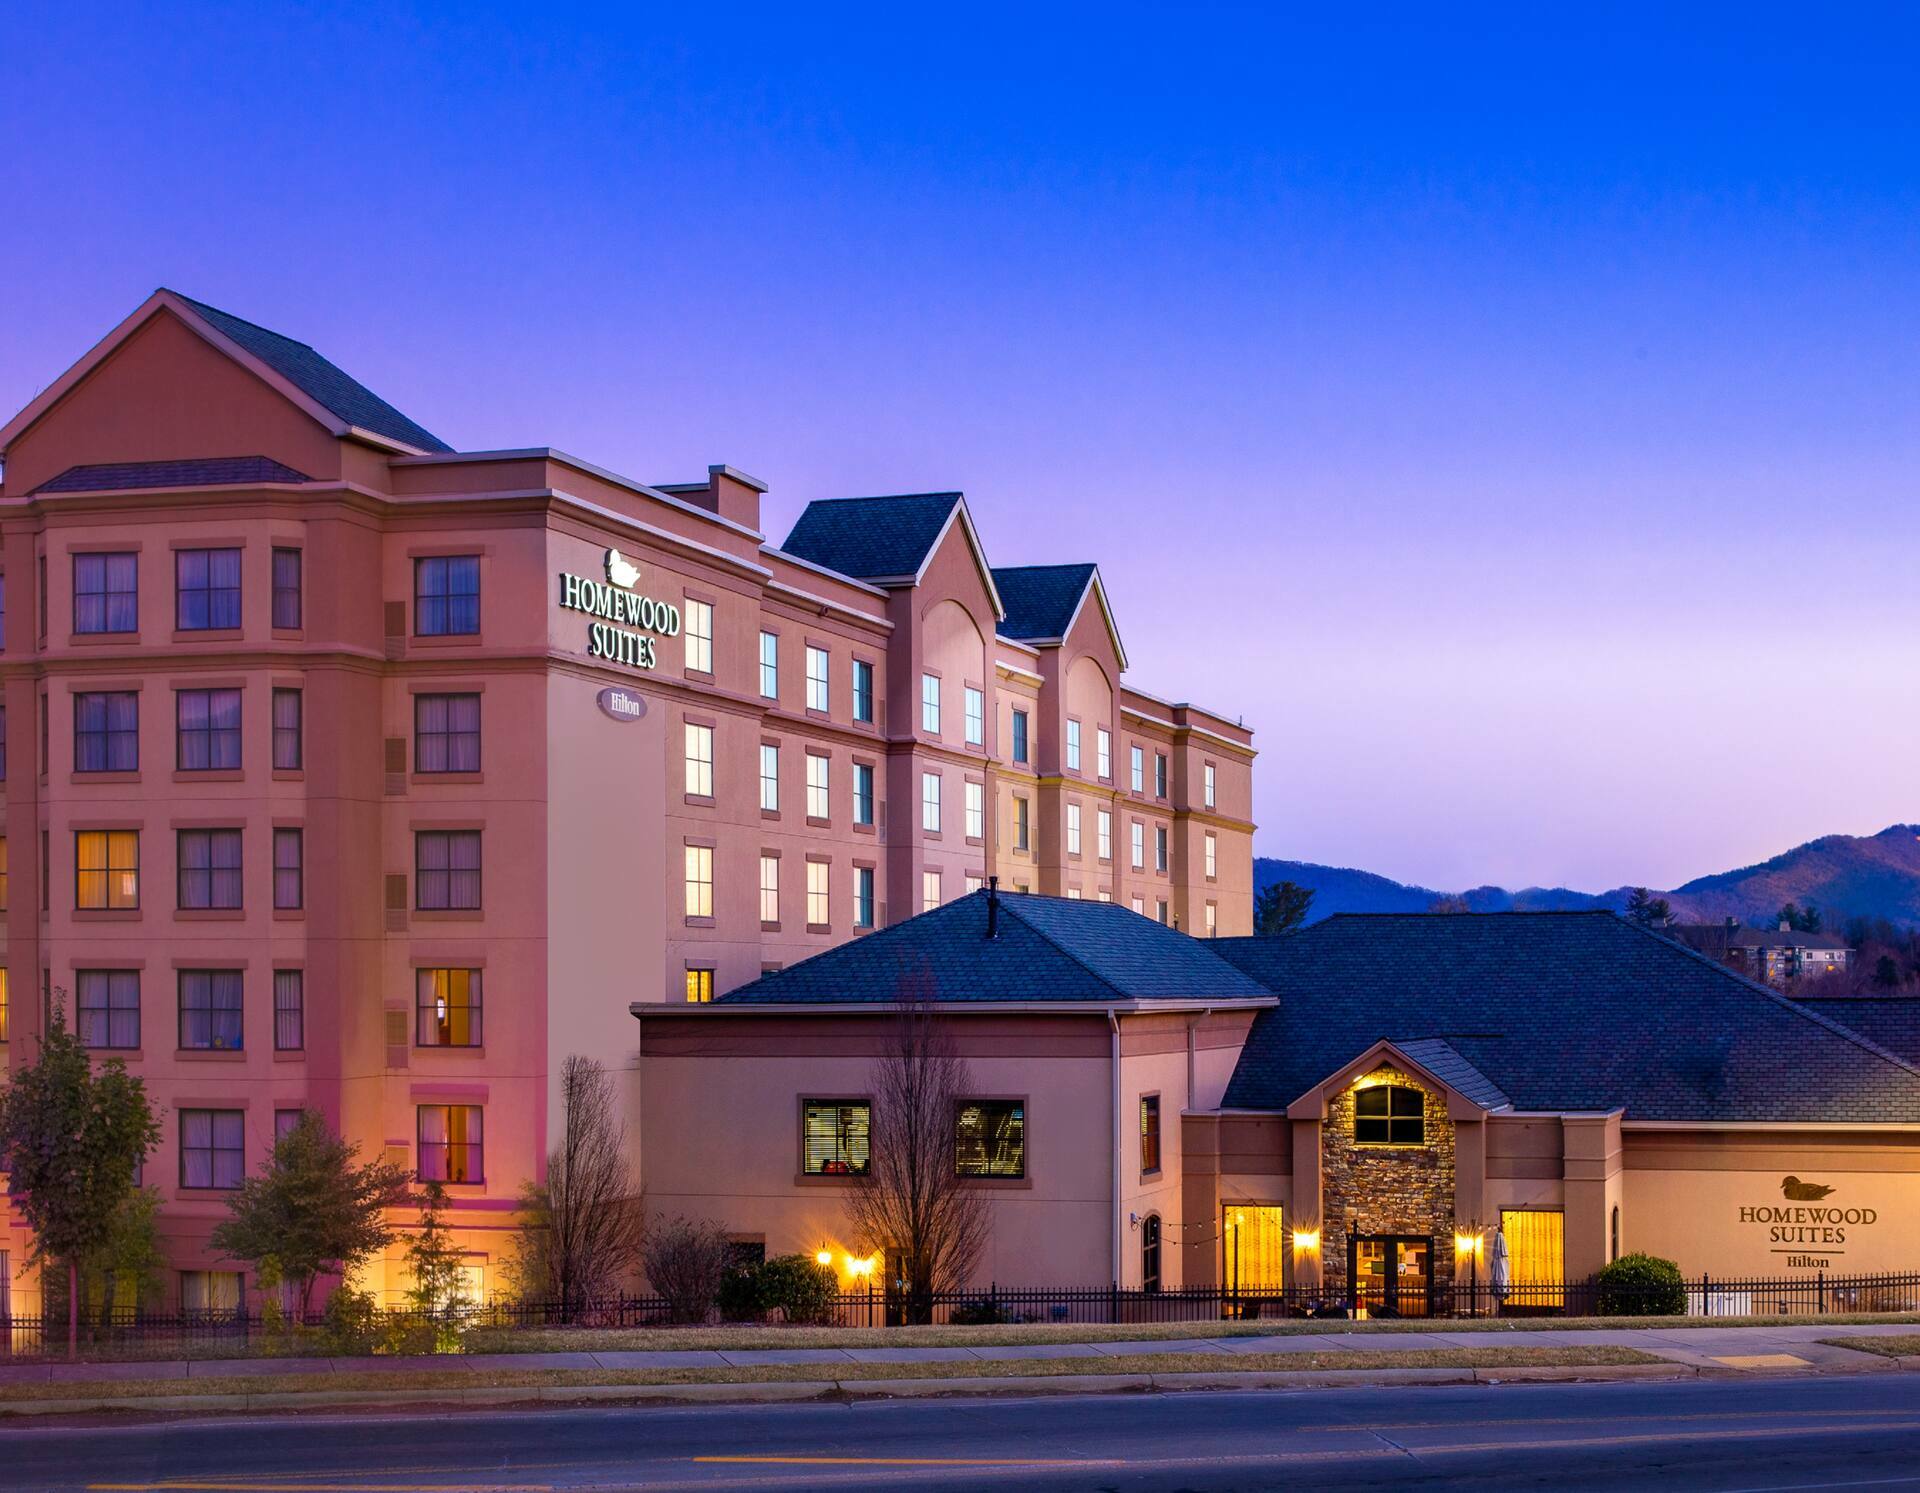 Photo of Homewood Suites by Hilton Asheville-Tunnel Road, Asheville, NC